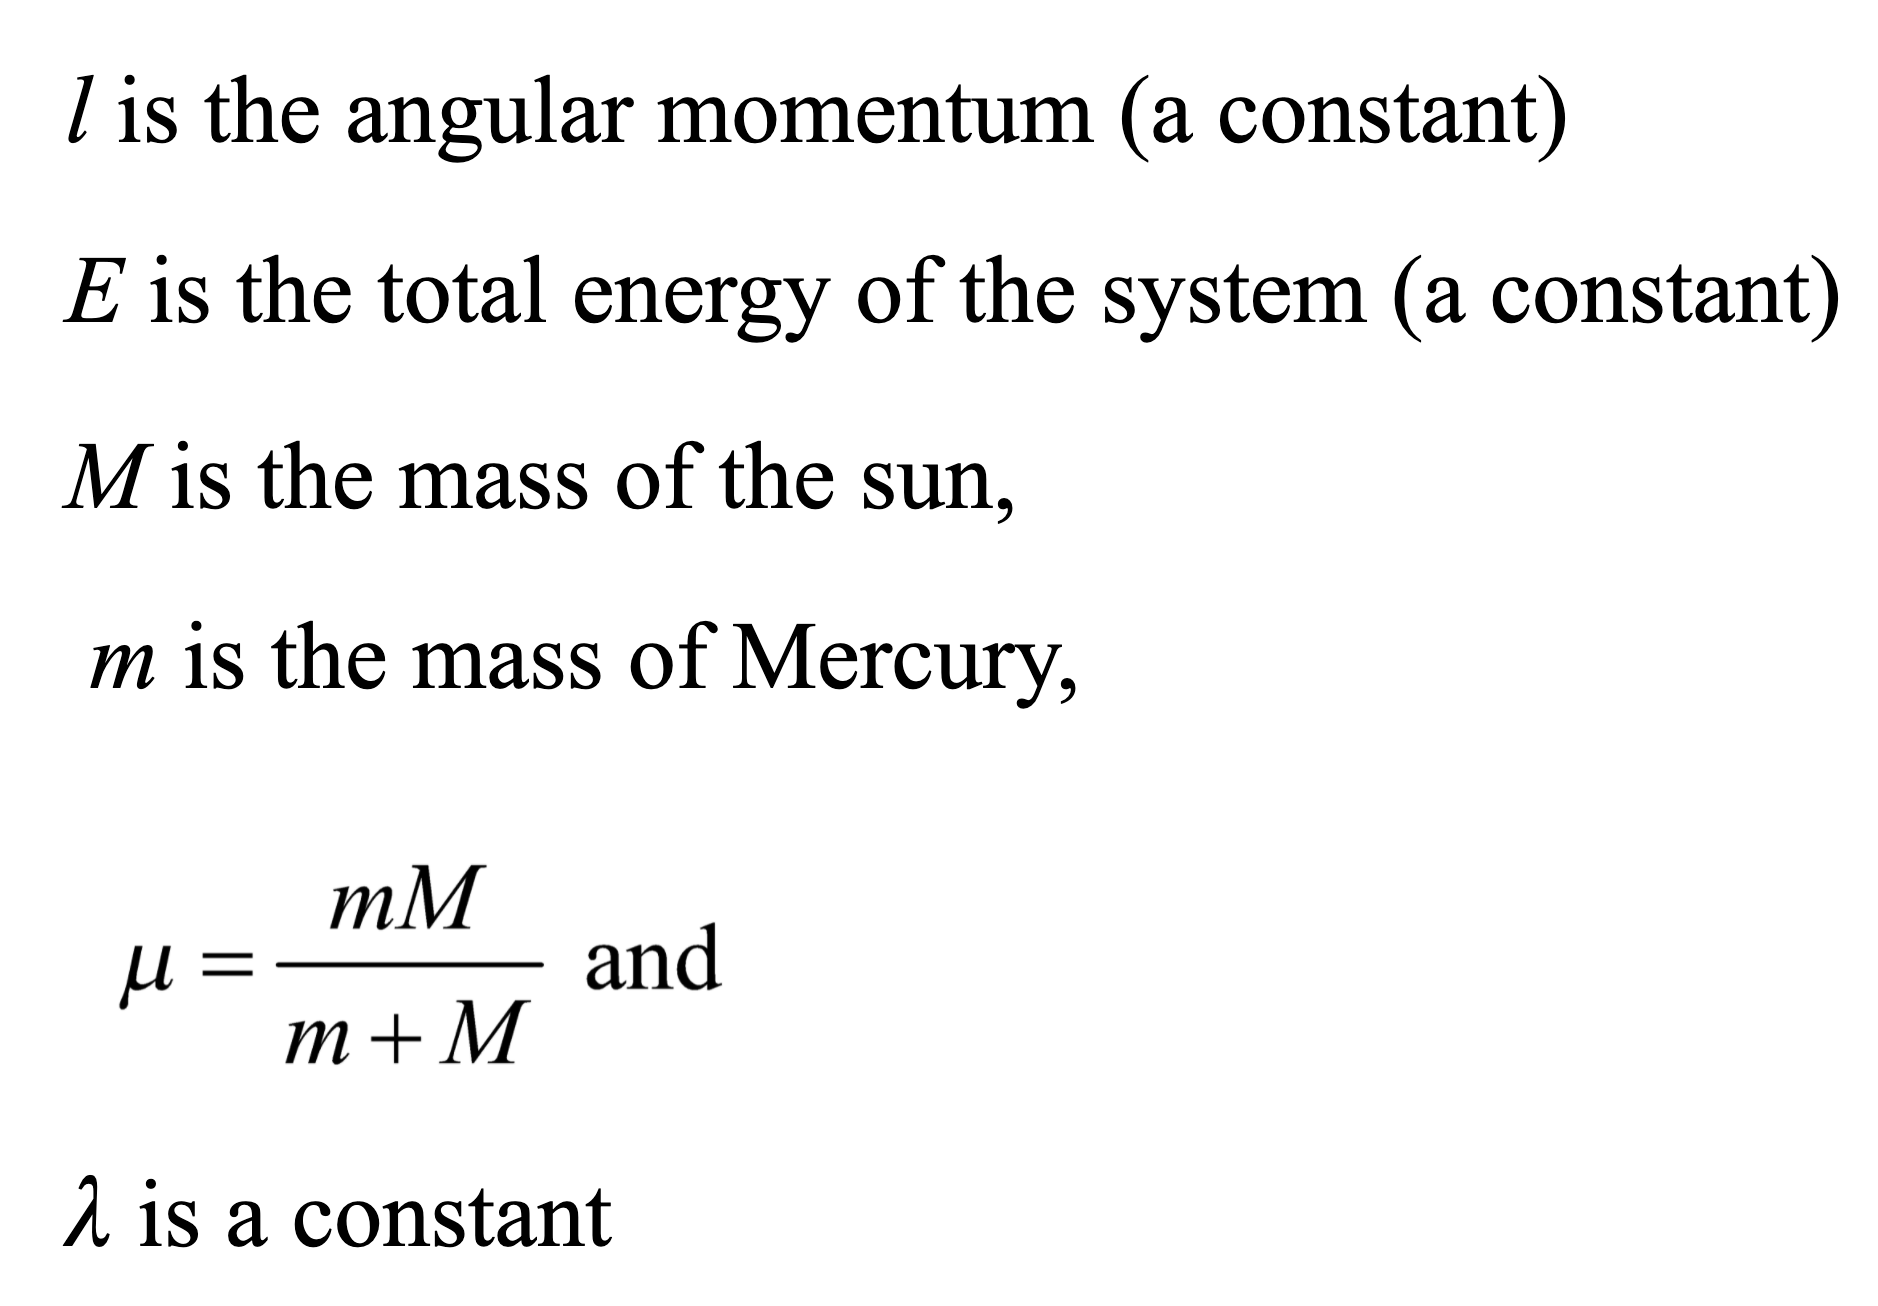 l is the angular momentum (a constant), E is the total energy of the system (a constant), M is the mass of the sun, m is the mass of Mercury, λ is a constant